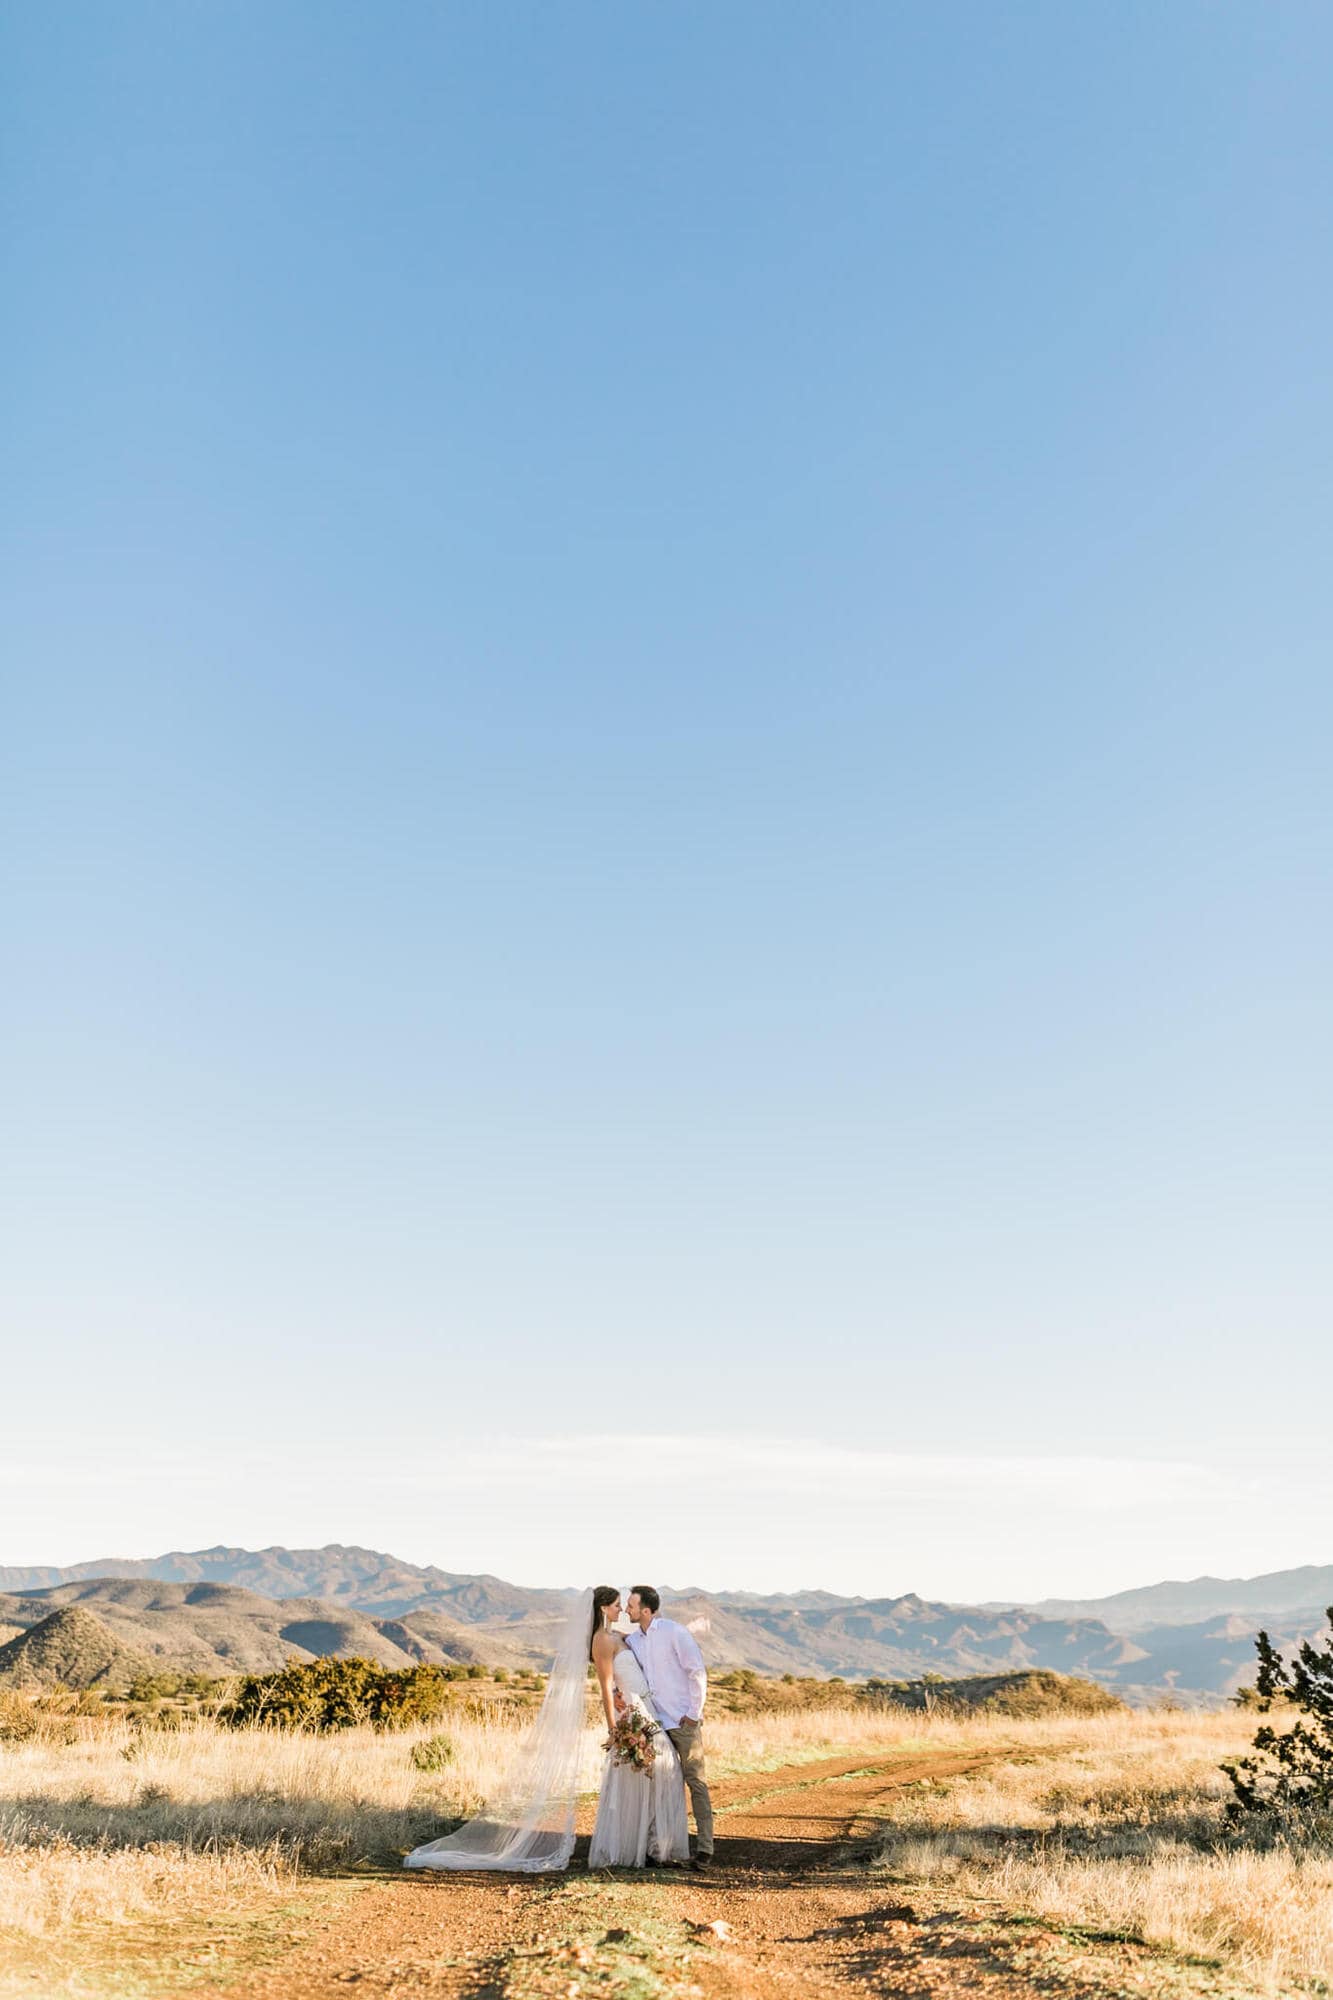 With the bright blue mountain sky behind them, the groom hugs the bride. 